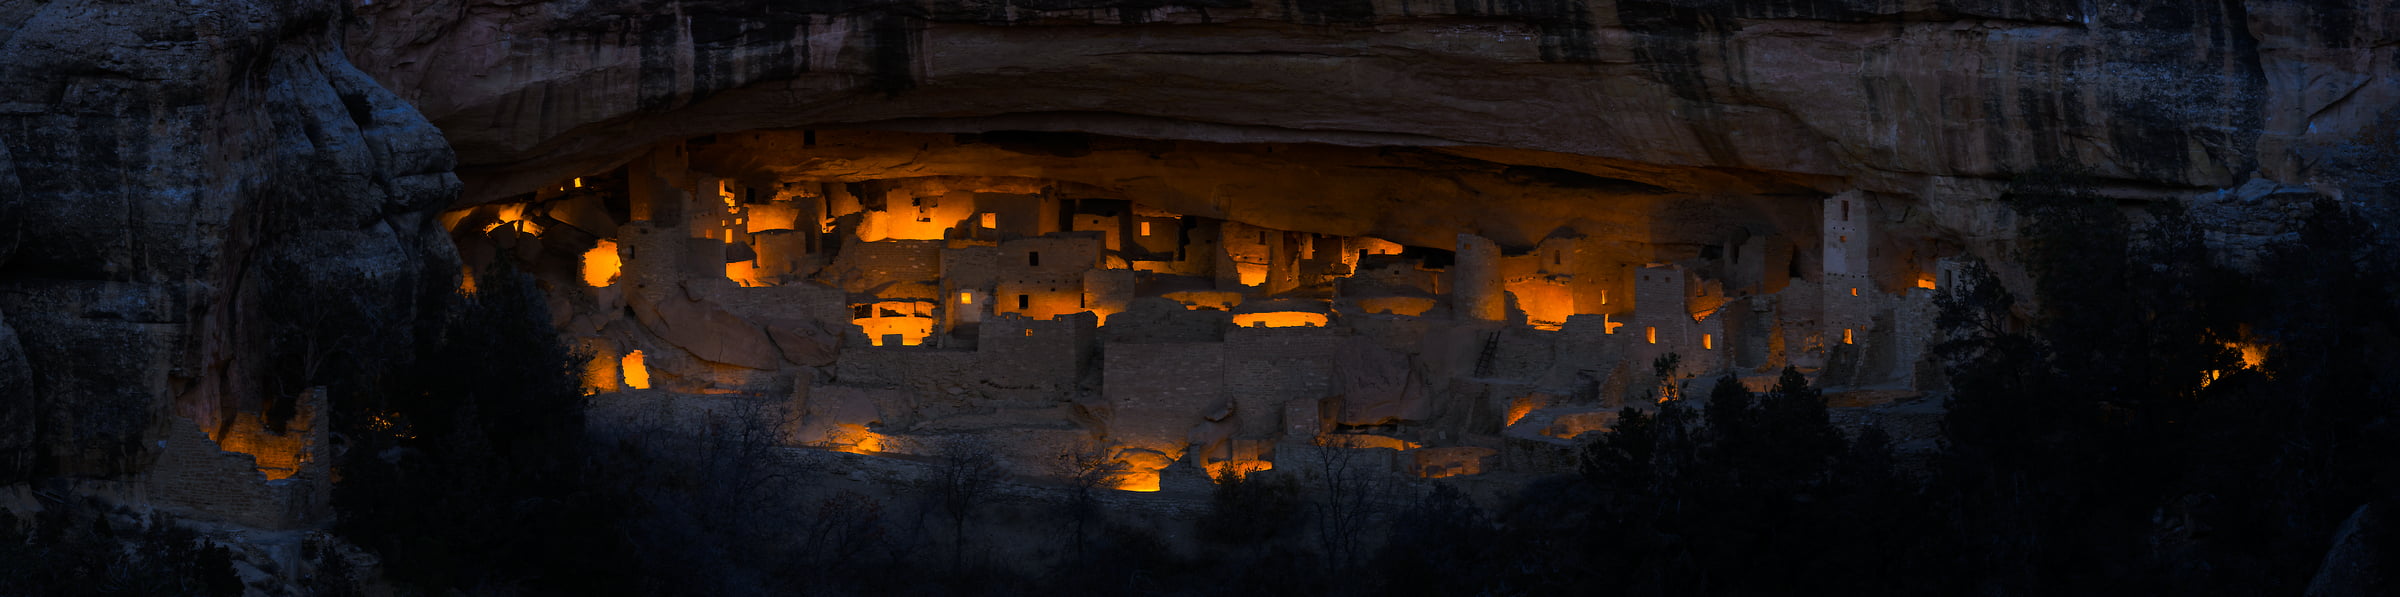 188 megapixels! A very high resolution, large-format VAST photo print of Mesa Verde National Park at night; fine art photograph created by Phillip Noll